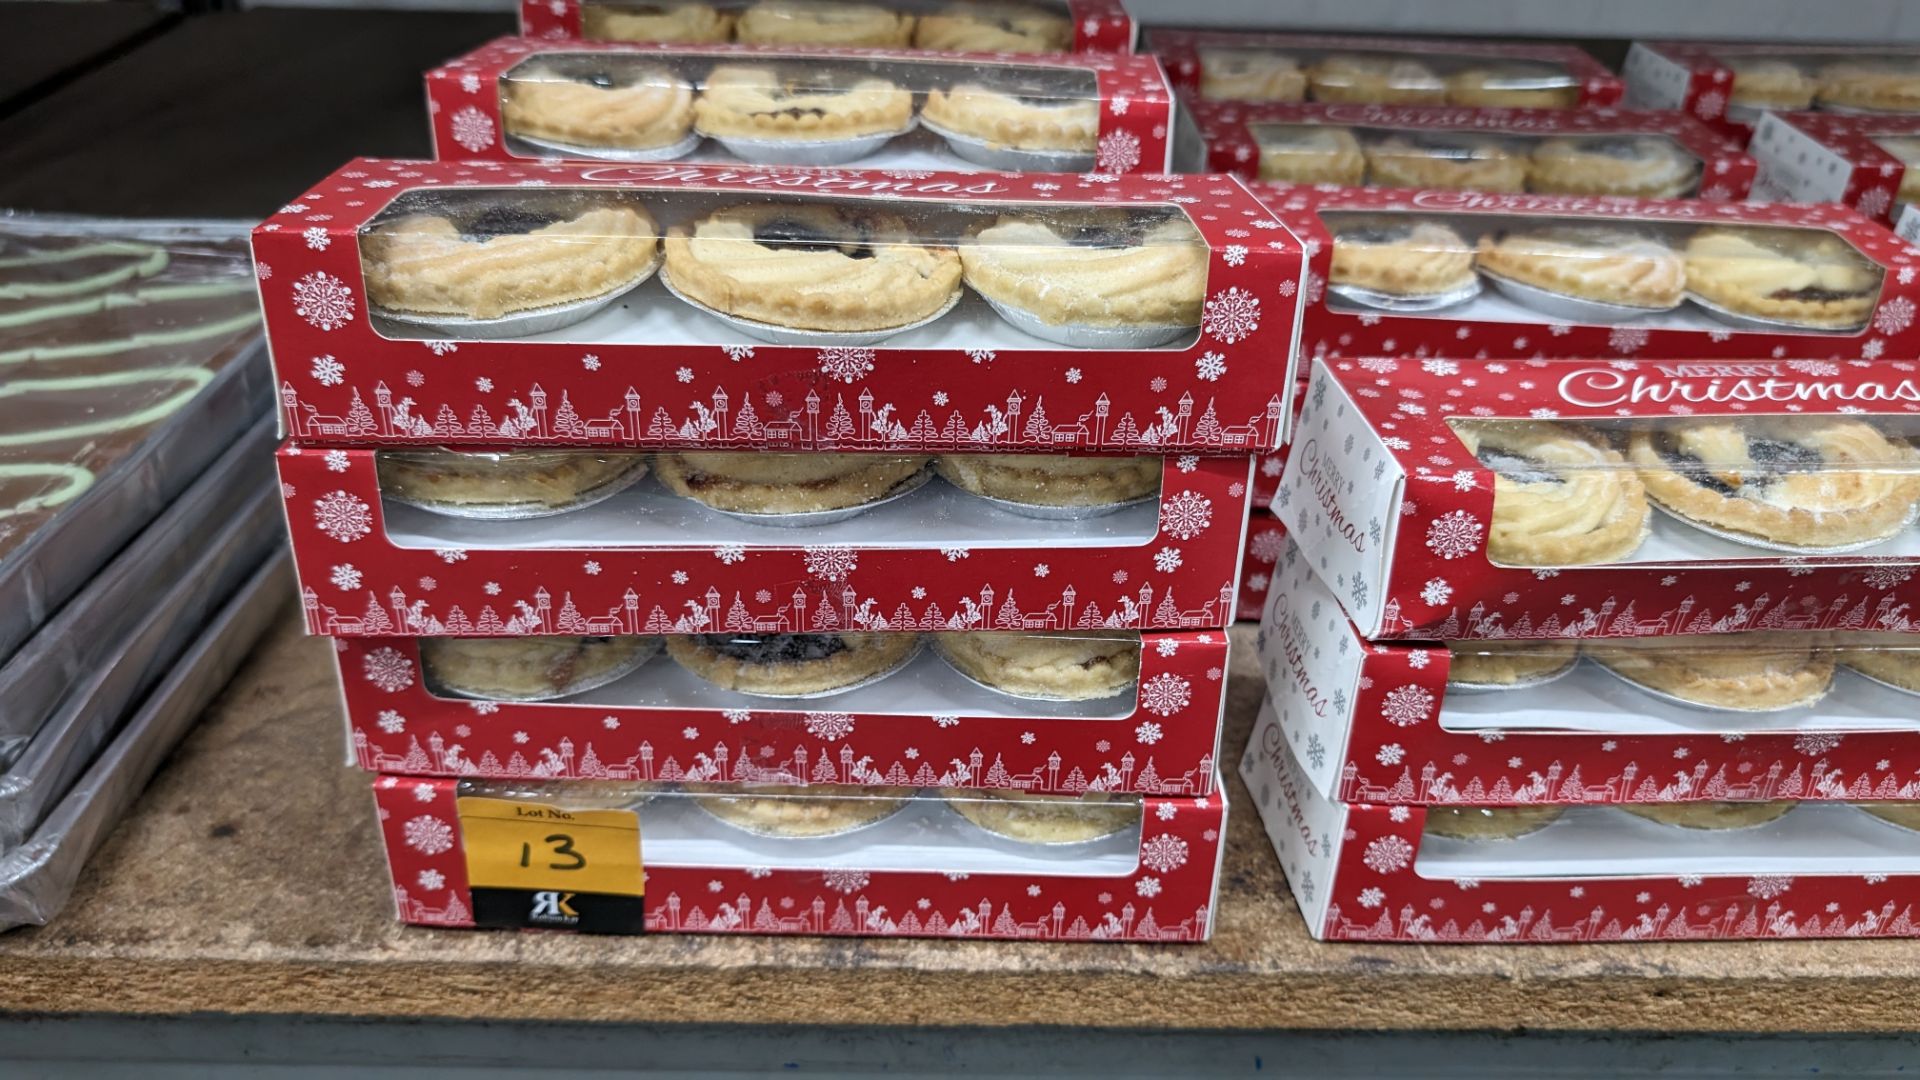 40 off 6 packs of Christmas mince pies. Each pack contains 6 pies on 2 layers & comes in Merry Chri - Image 3 of 10